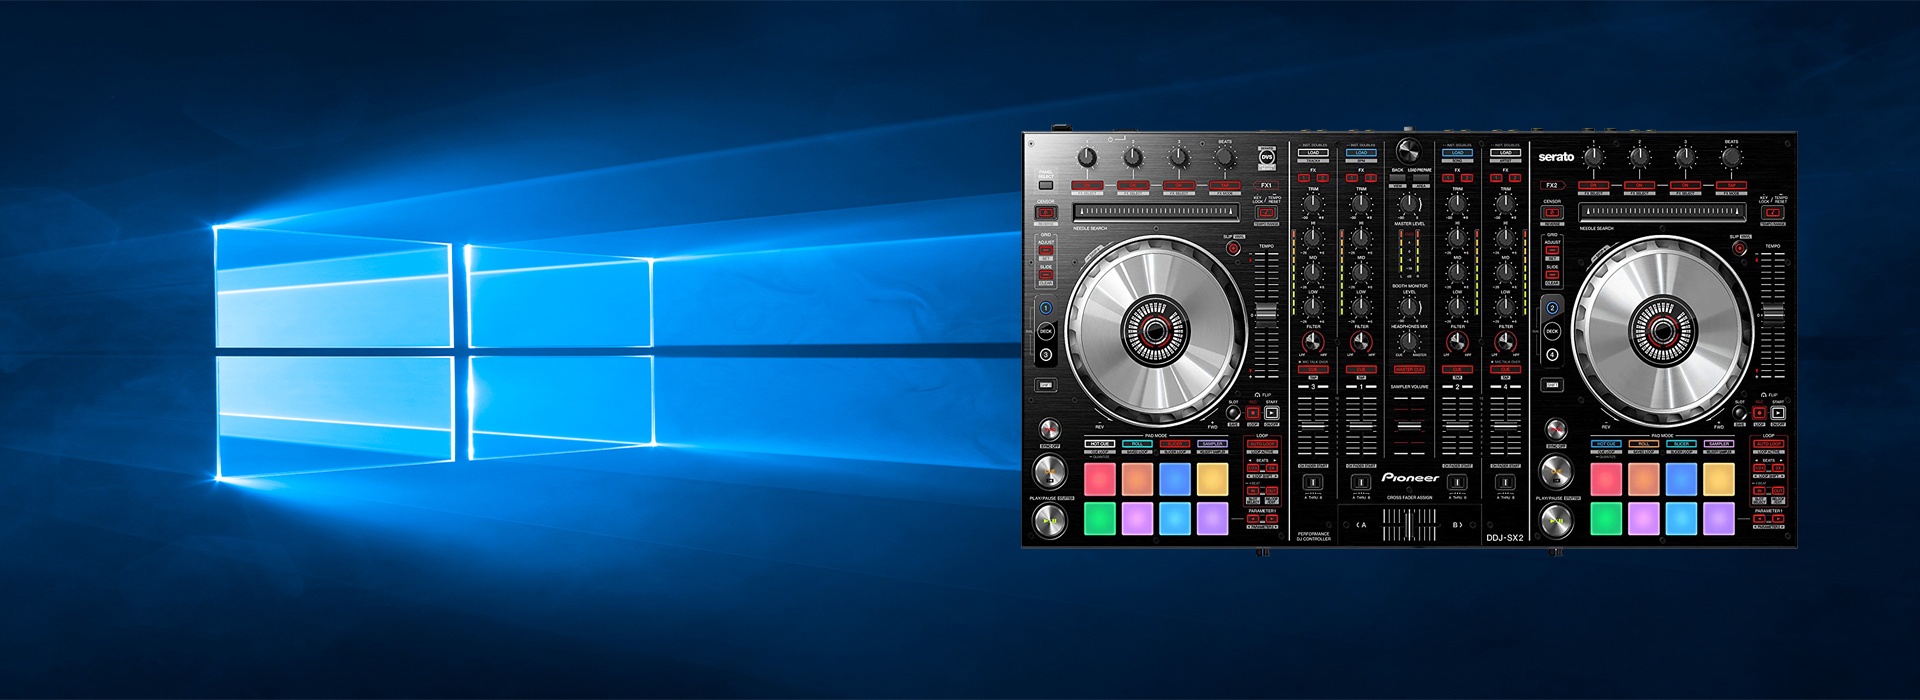 how to download ddj sx2 driver for windows